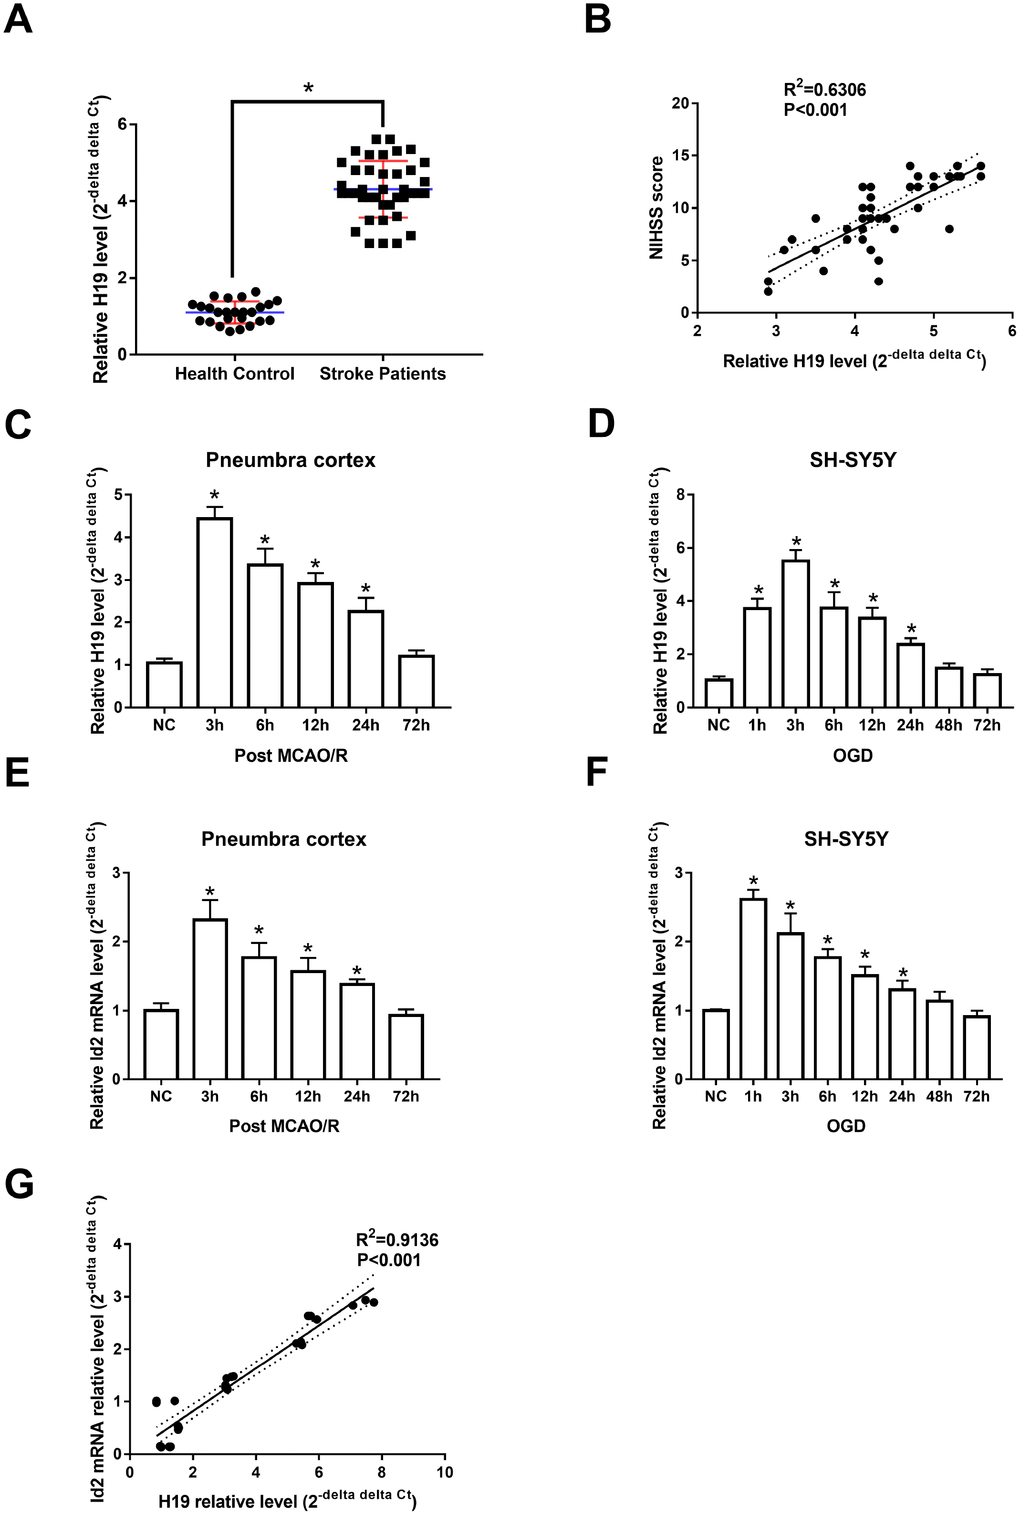 H19 and Id2 expression levels were significantly elevated in the setting of hypoxia/ischemia. (A) qRT-PCR revealed that H19 levels in the plasma of ischemic stroke patients were significantly elevated, compared with normal control patients. (B) The elevated H19 levels were positively correlated with patient NIHSS scores within 3 hours of stroke onset. (C) In the penumbra cortex of rats, H19 levels increased and peaked at 3 h, and returned to normal levels at 72 h after MCAO/R. (D) In OGD neuronal cells, H19 levels showed a similar tendency of in vivo study. (E) qRT-PCR analysis revealed that Id2 mRNA levels in the penumbra cortex of rats increased significantly and peaked at 3 h after MCAO/R in; however, Id2 mRNA levels returned to baseline at 72 h post MCAO/R. (F) Similar results were revealed in OGD neuronal cells. (G) A correlation analysis revealed that Id2 mRNA level was positively correlated with H19 level in OGD neuronal cells.